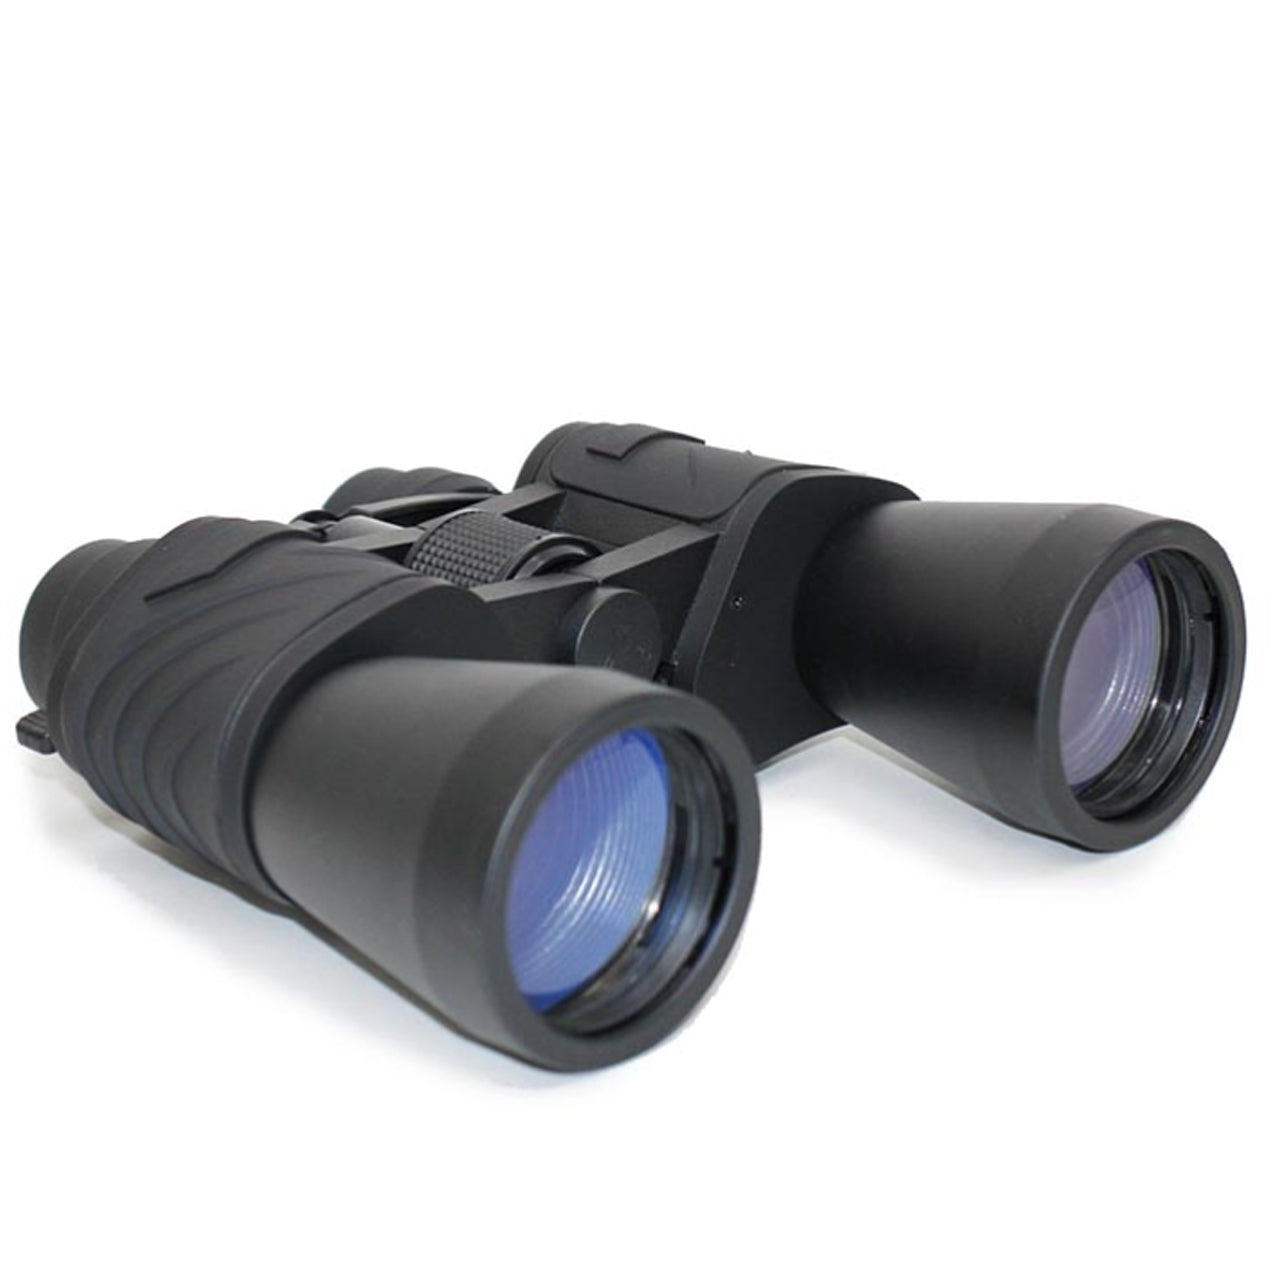 The zoom component is capable of zooming in from 10x-30x magnification. They will for sure help you see near and far with no problems at all. These binoculars are versatile, high quality and easy to use, making them a comprehensive pair of general purpose binoculars. www.defenceqstore.com.au